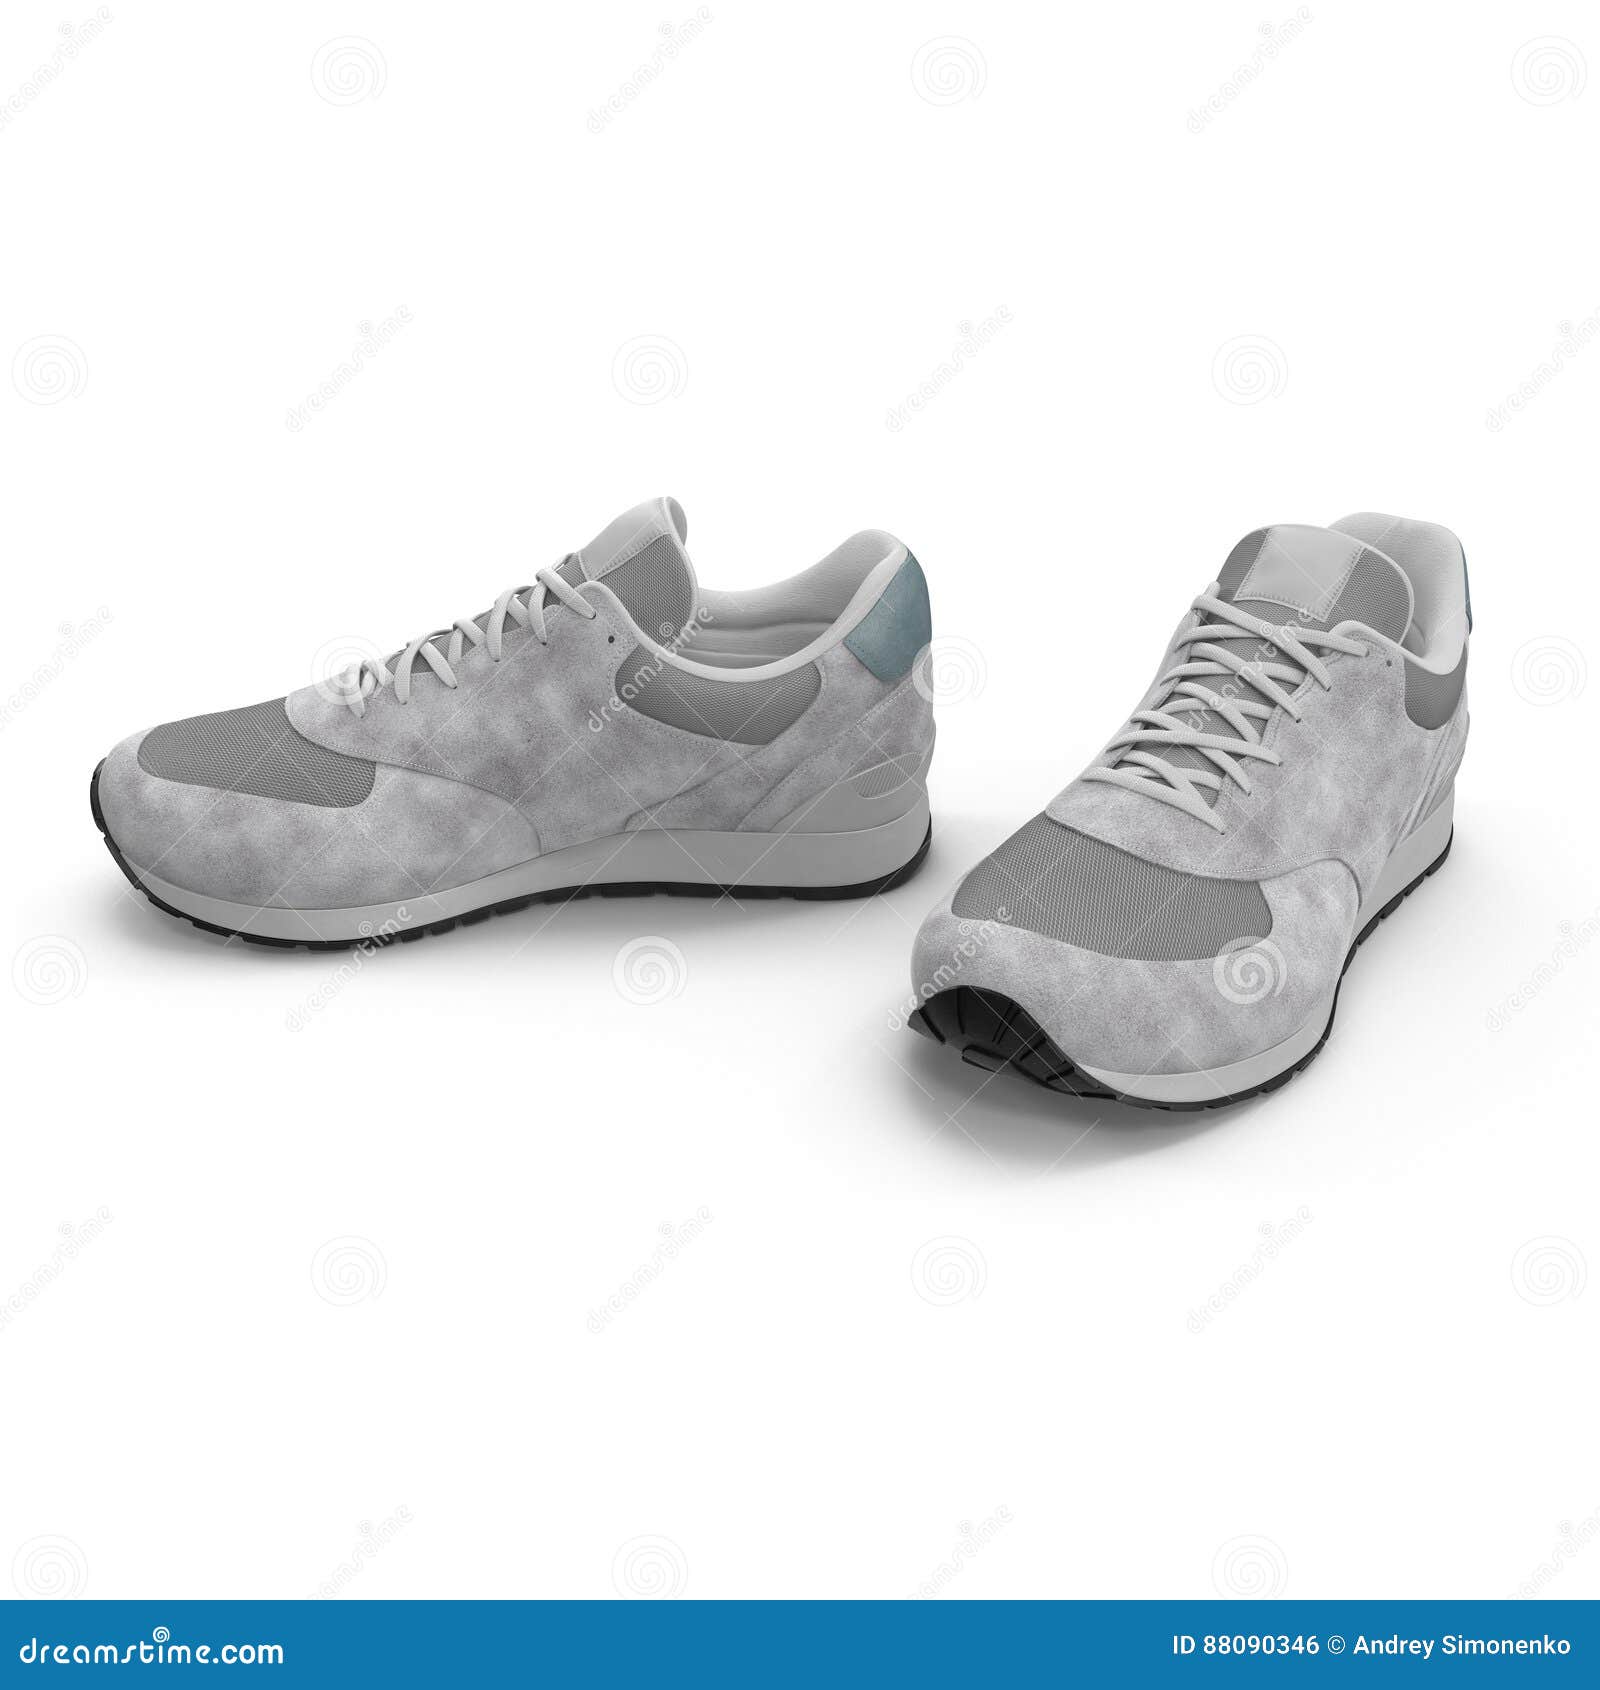 New Unbranded Running Shoe, Sneaker Or Trainer Isolated On White. 3D ...